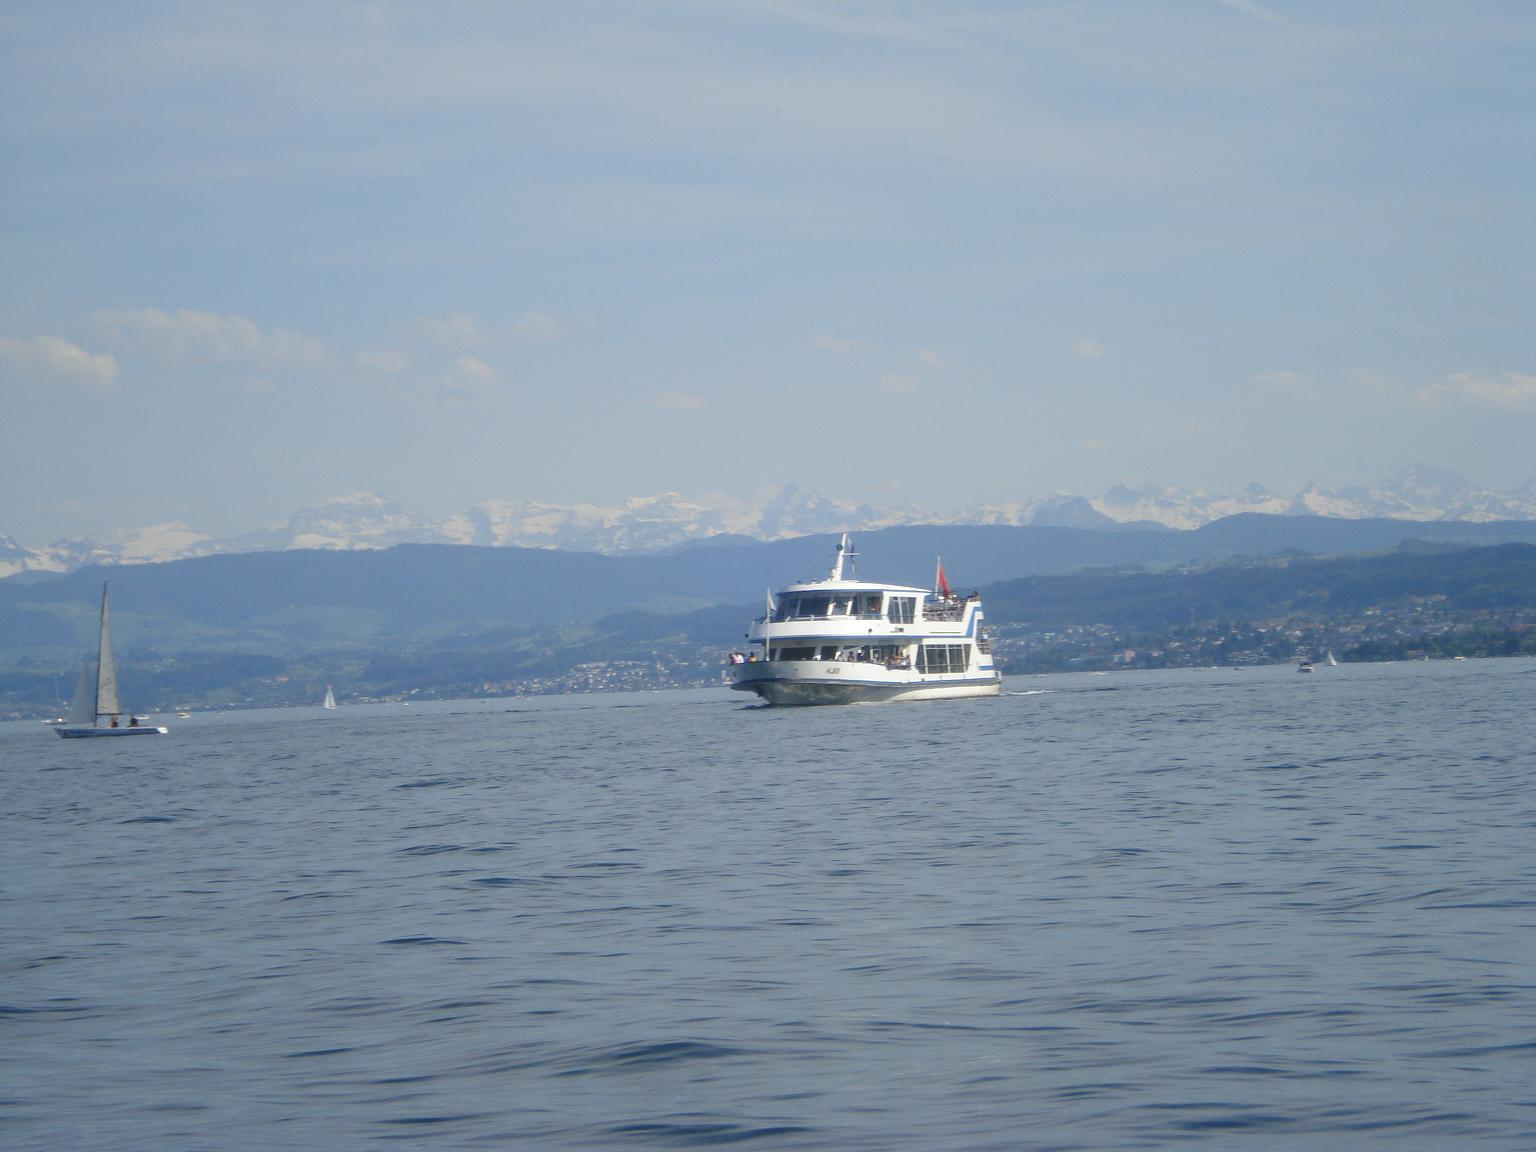 озеро Цюриха. You can rent a boat in Zurich, on Zurich lake